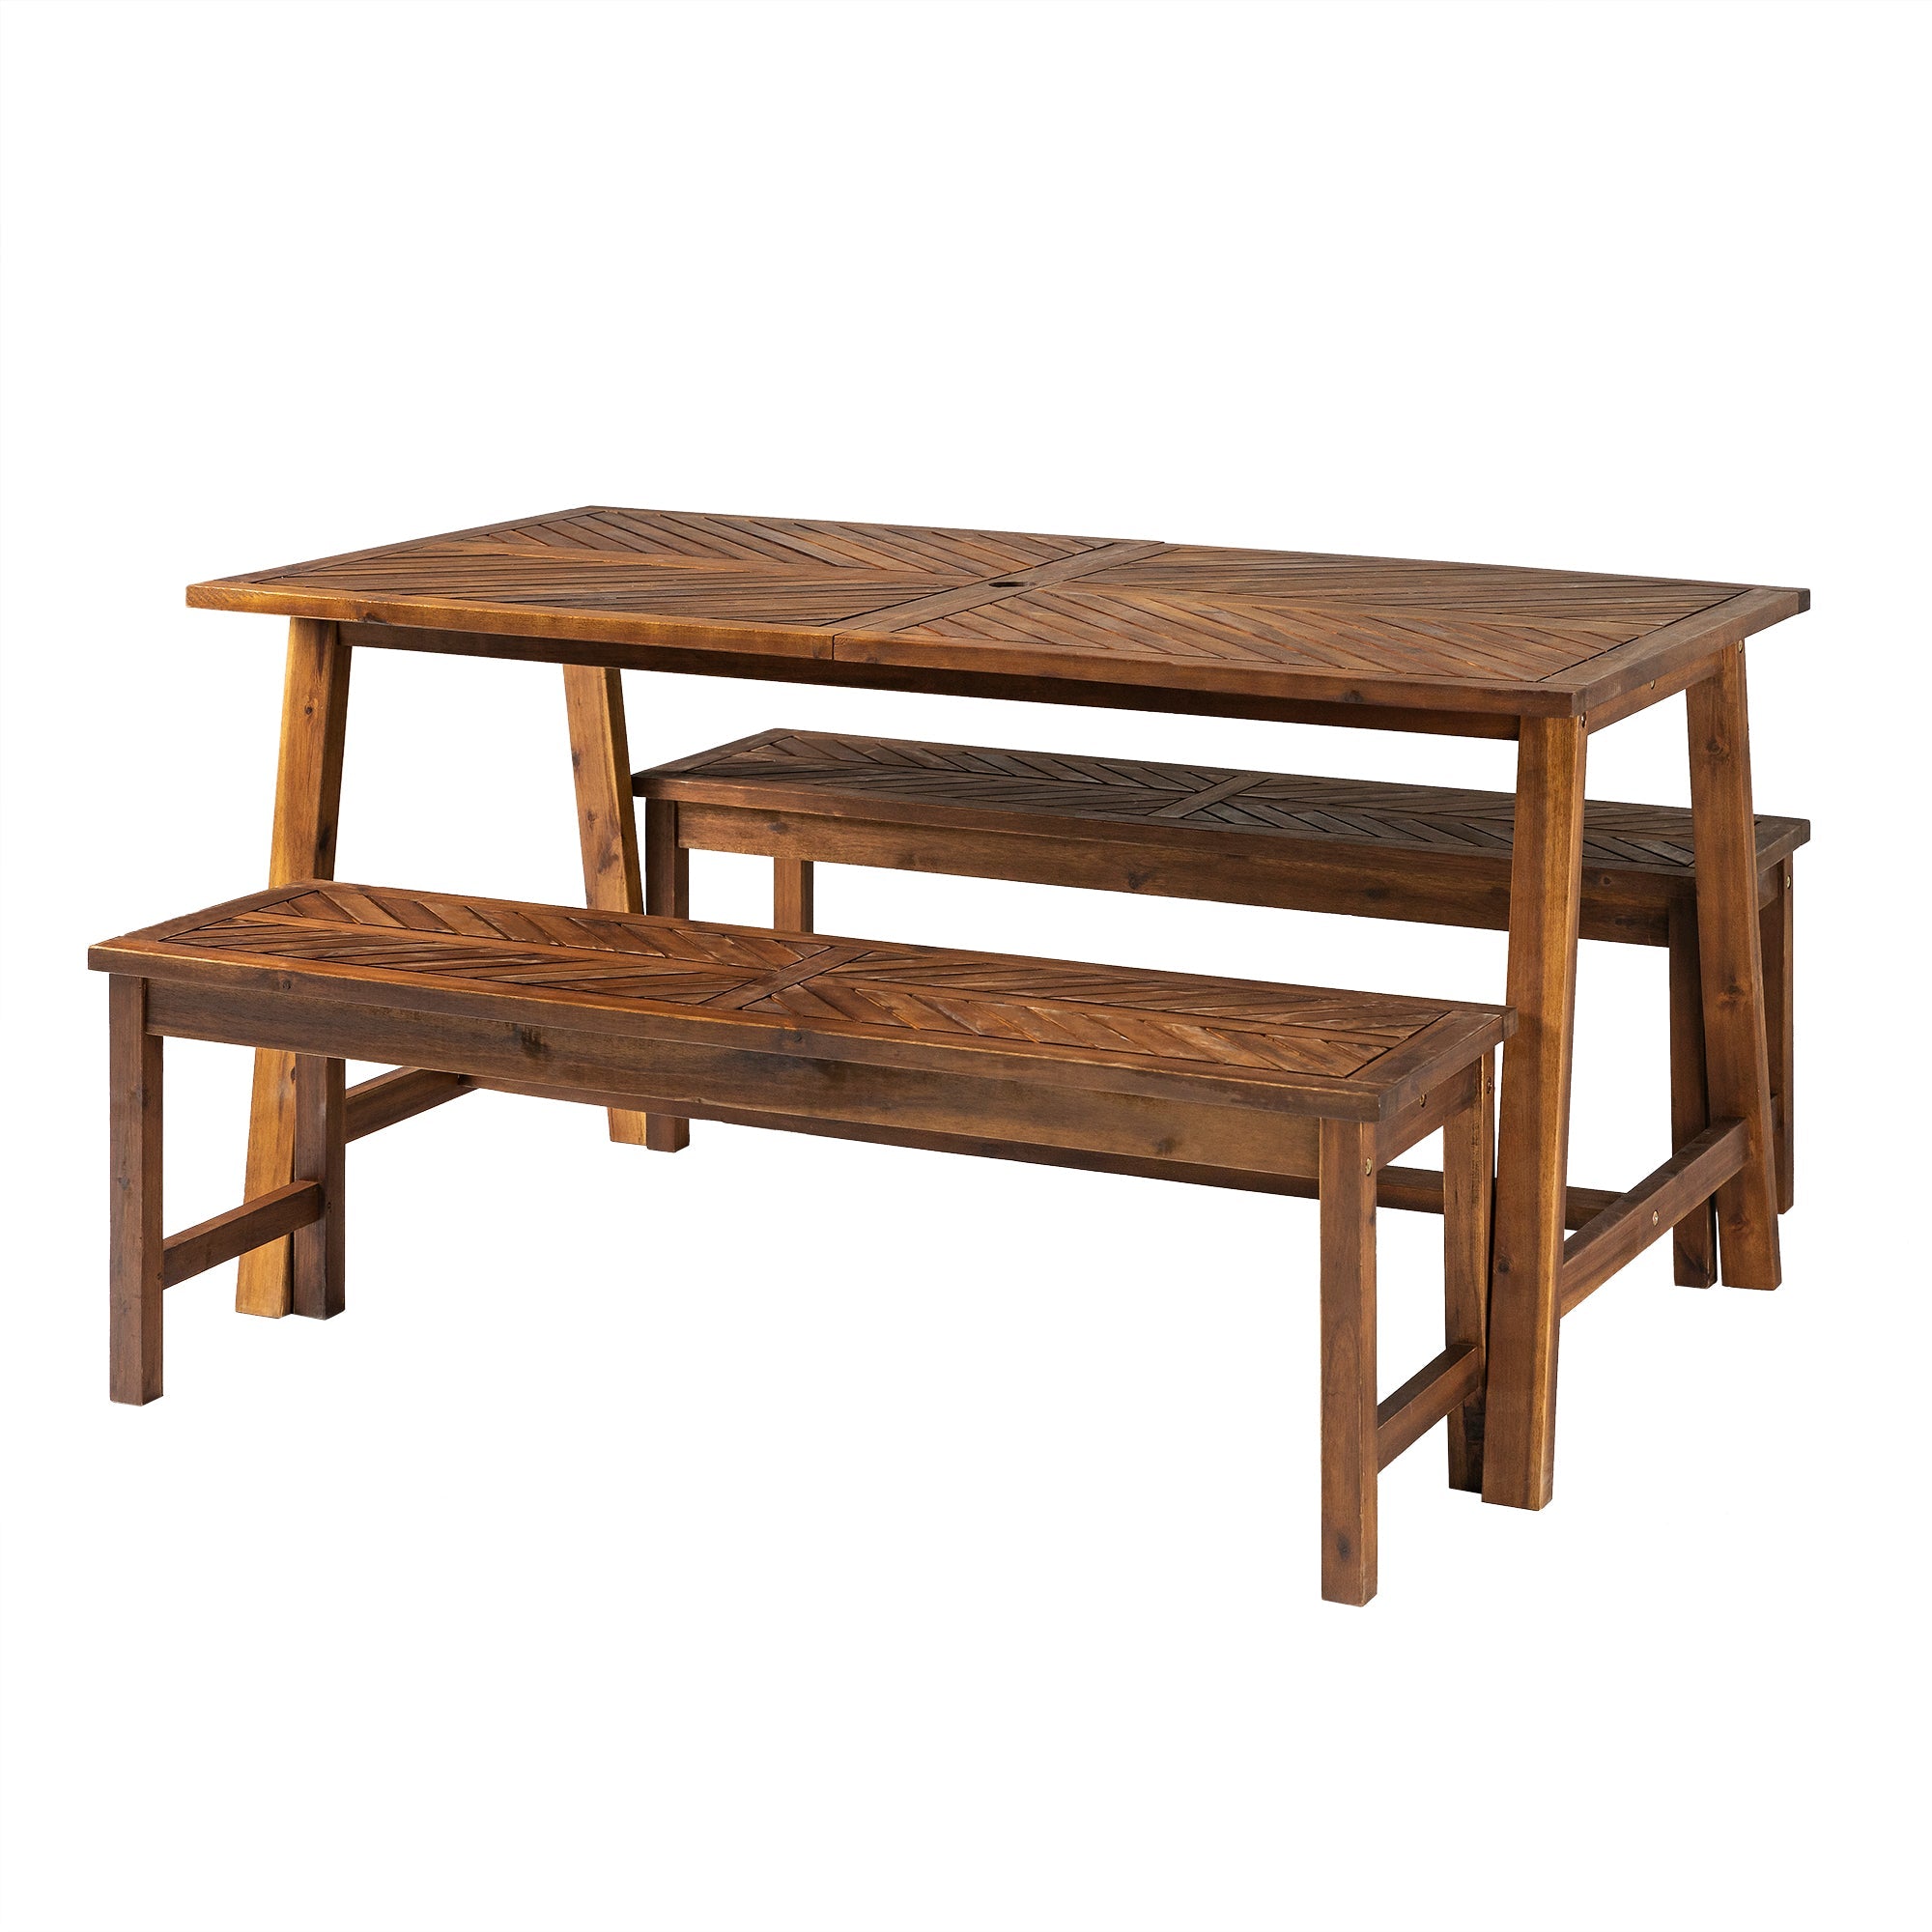 Vincent 3 Piece Acacia Wood Outdoor Chevron Picnic Dining Table Set - East Shore Modern Home Furnishings